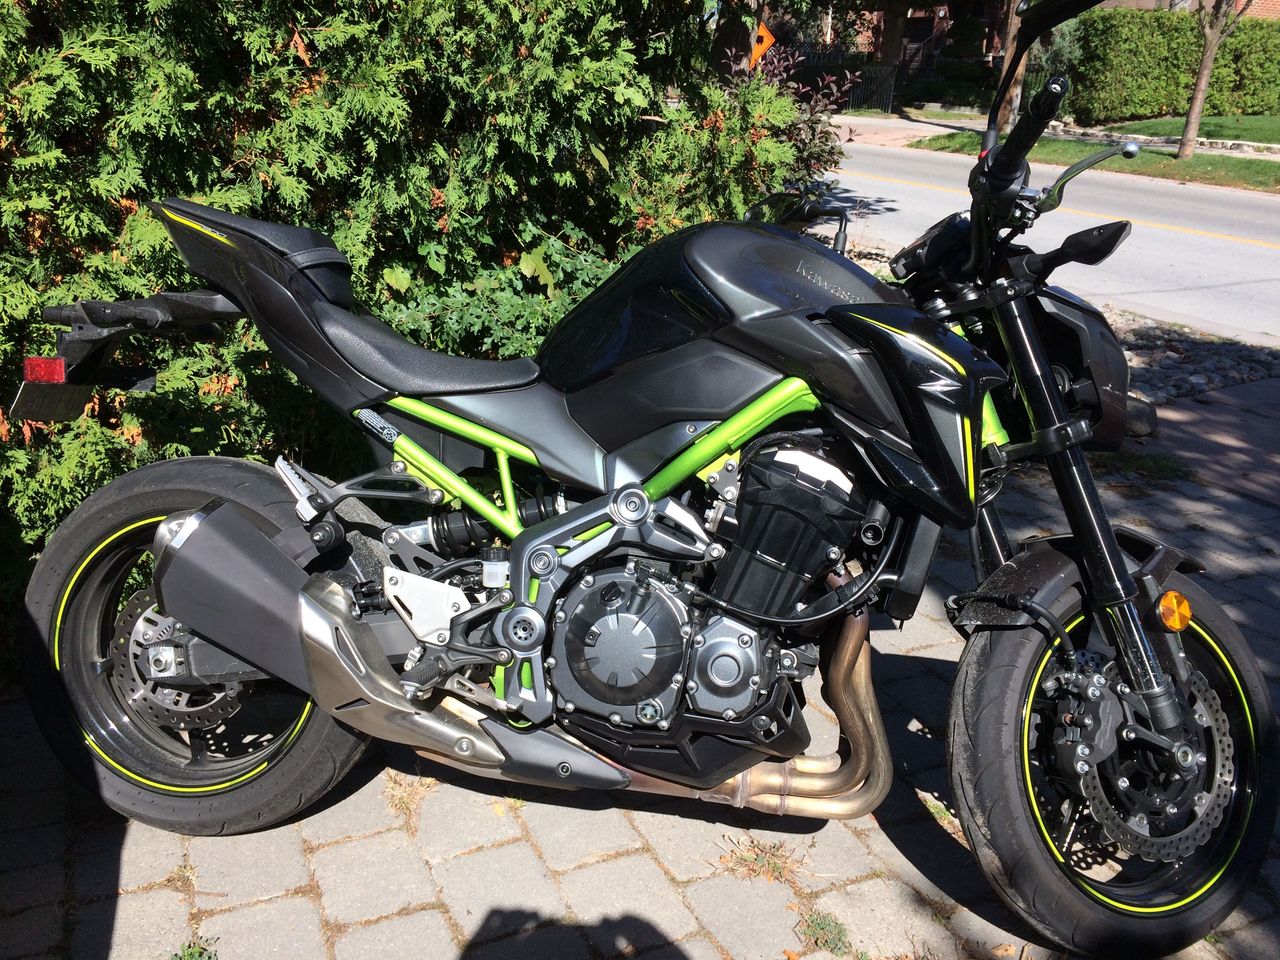 Bought a new Z900 last week! This thing is a blast to ride! Can't